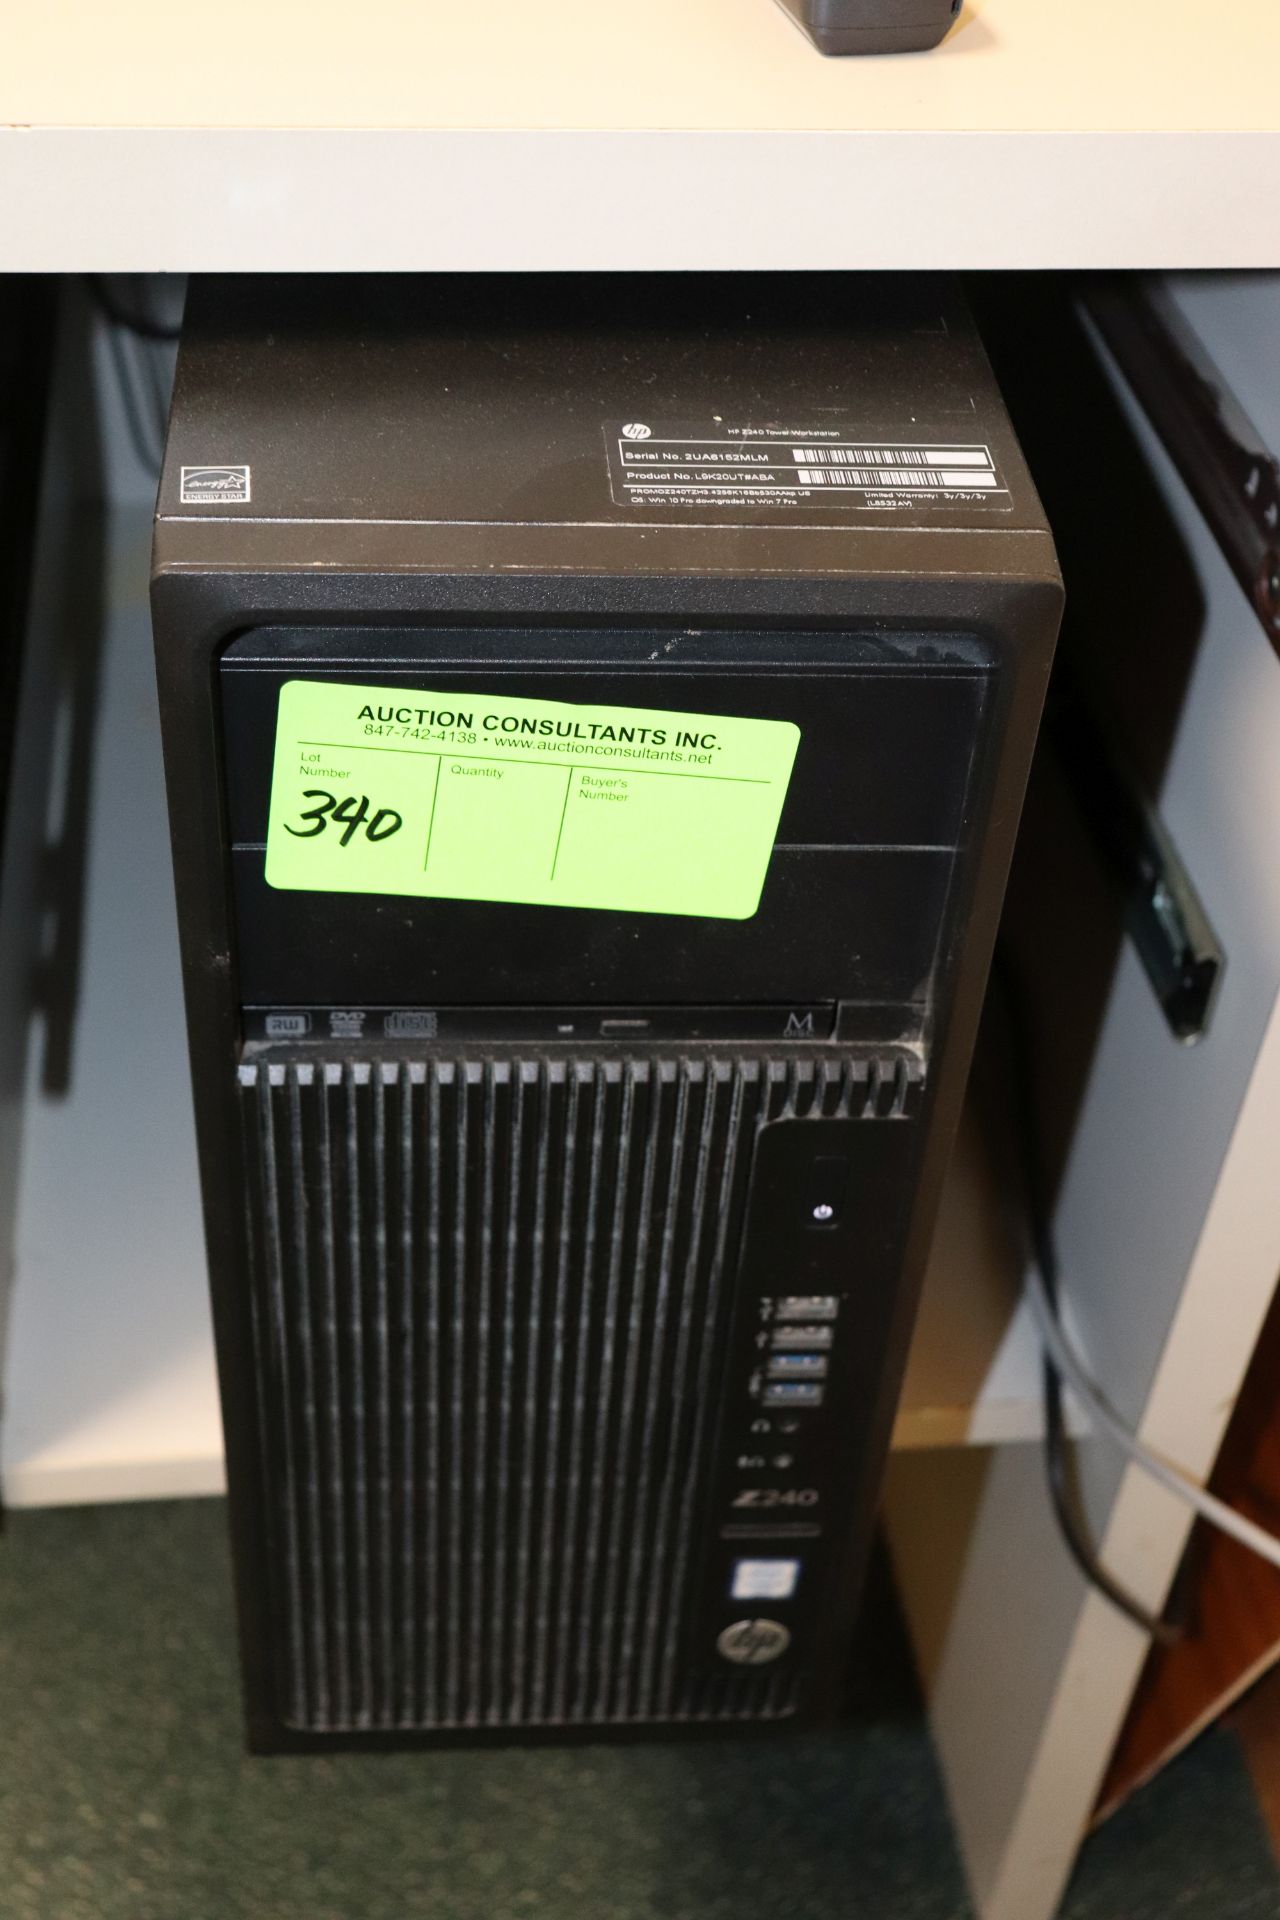 HP Z240 desktop computer with Intel Core i7 processor, product # L9K20UT#ABA with